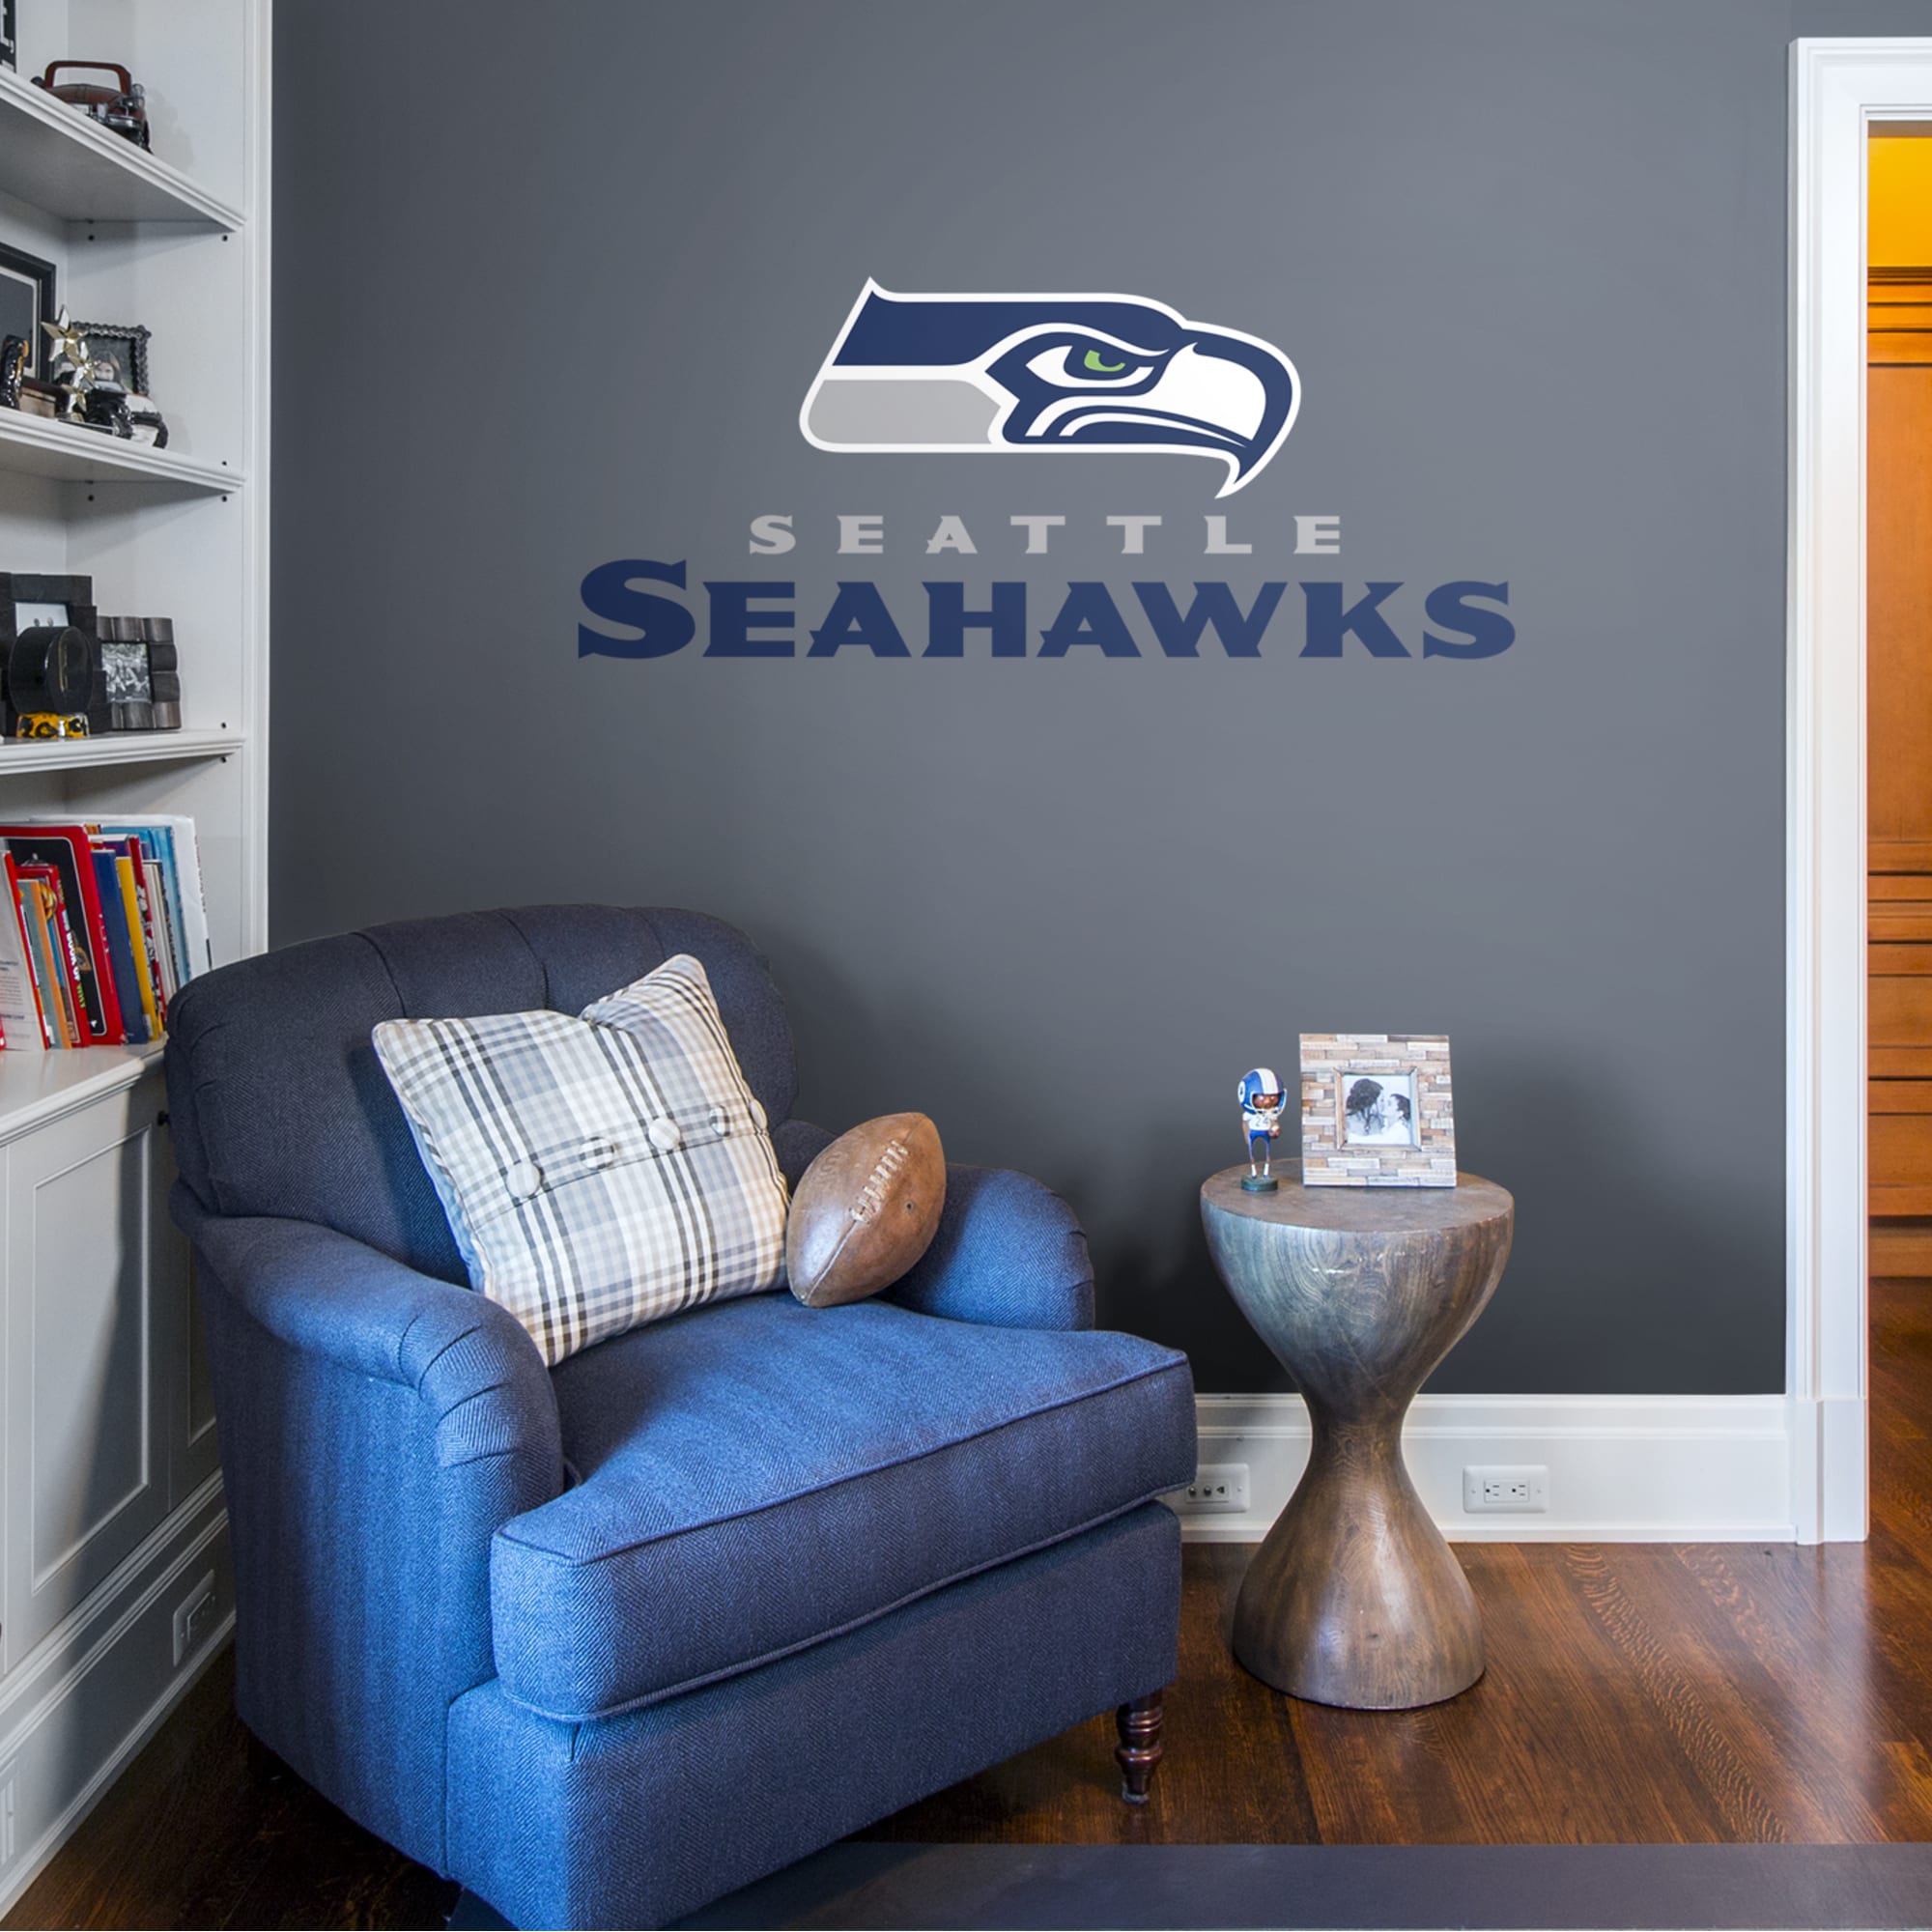 Seattle Seahawks: Logo - Officially Licensed NFL Transfer Decal by Fathead